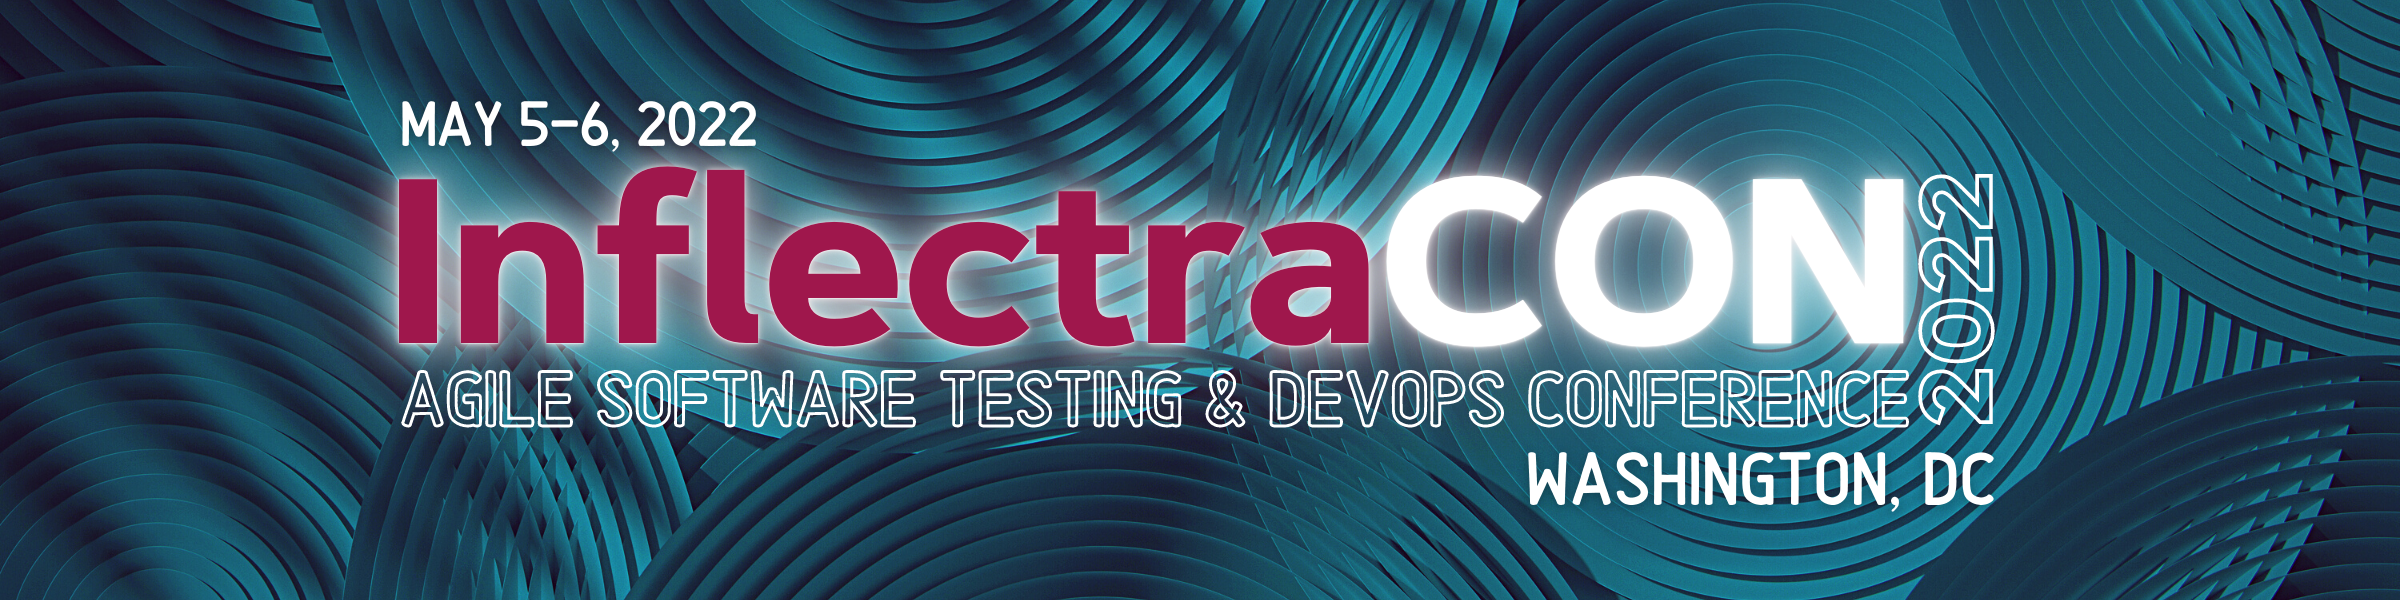 inflectracon-2022-agile-testing-and-devops-conference-inflectra-image